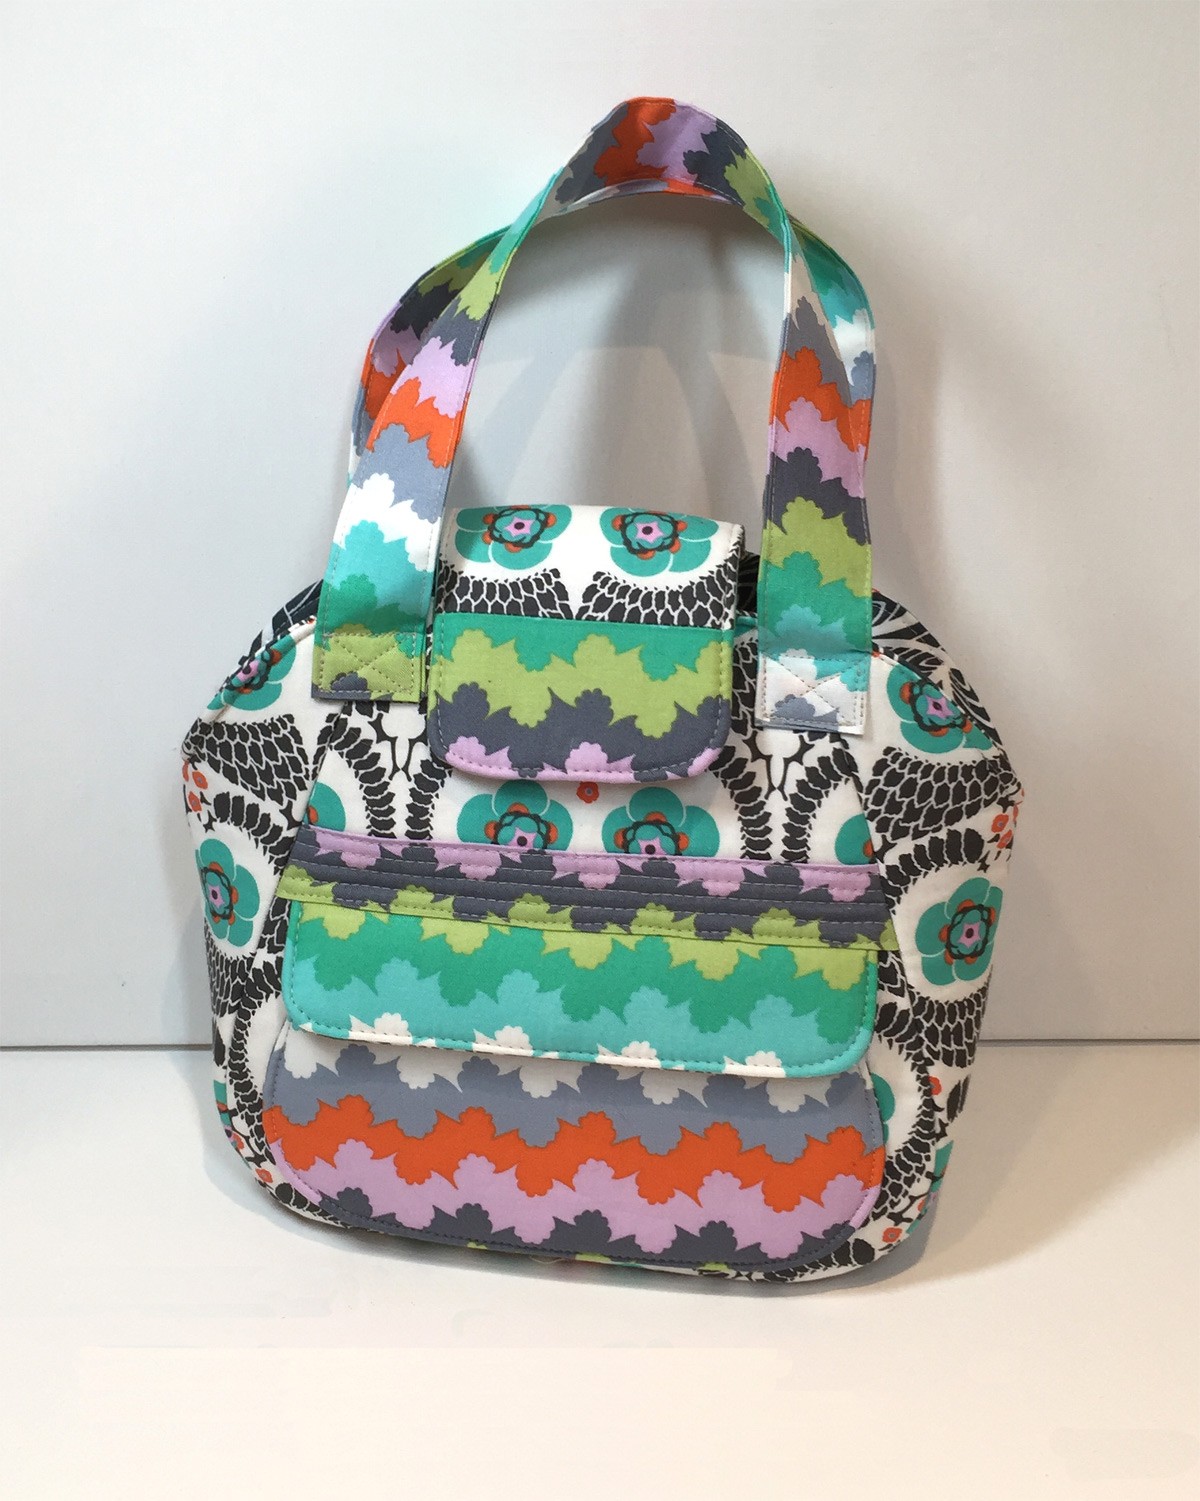 FREE PATTERN ALERT: 10 SEWING PATTERNS FOR HANDBAGS | On the Cutting ...